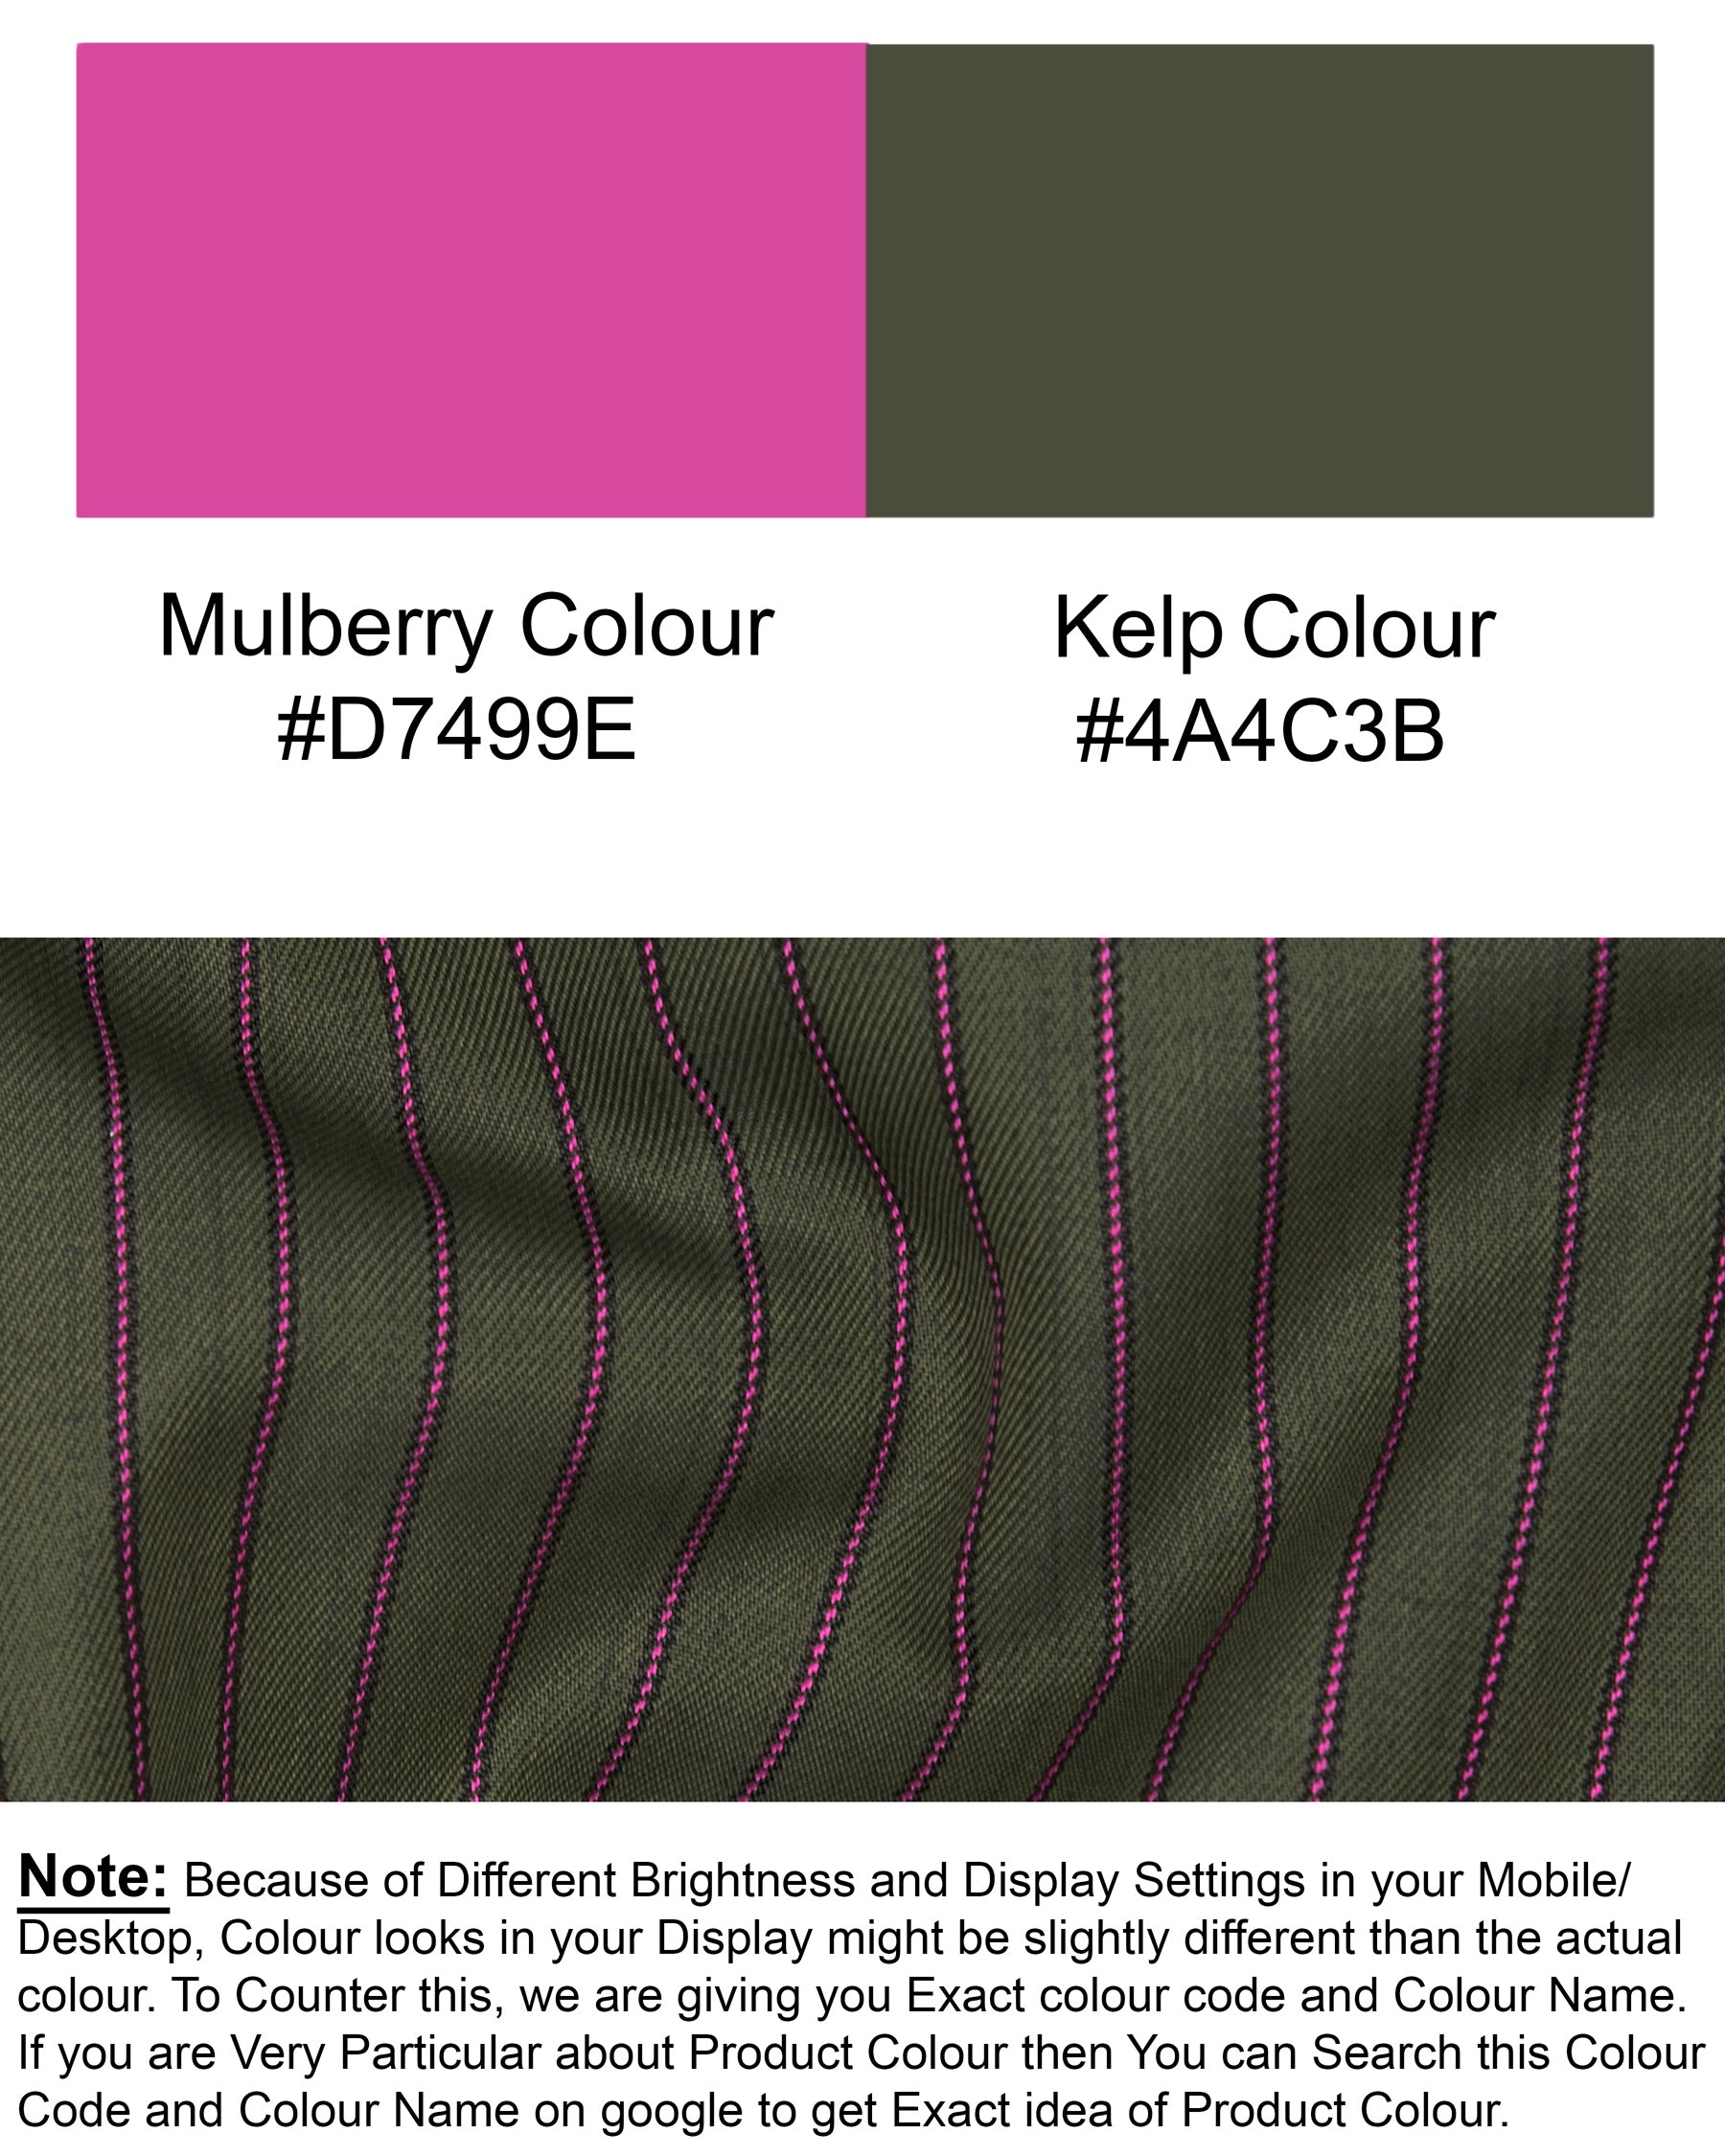 Kelp Green and Mulberry Pink Striped Woolrich Blazer BL1291-SBP-36, BL1291-SBP-38, BL1291-SBP-40, BL1291-SBP-42, BL1291-SBP-44, BL1291-SBP-46, BL1291-SBP-48, BL1291-SBP-50, BL1291-SBP-52, BL1291-SBP-54, BL1291-SBP-56, BL1291-SBP-58, BL1291-SBP-60